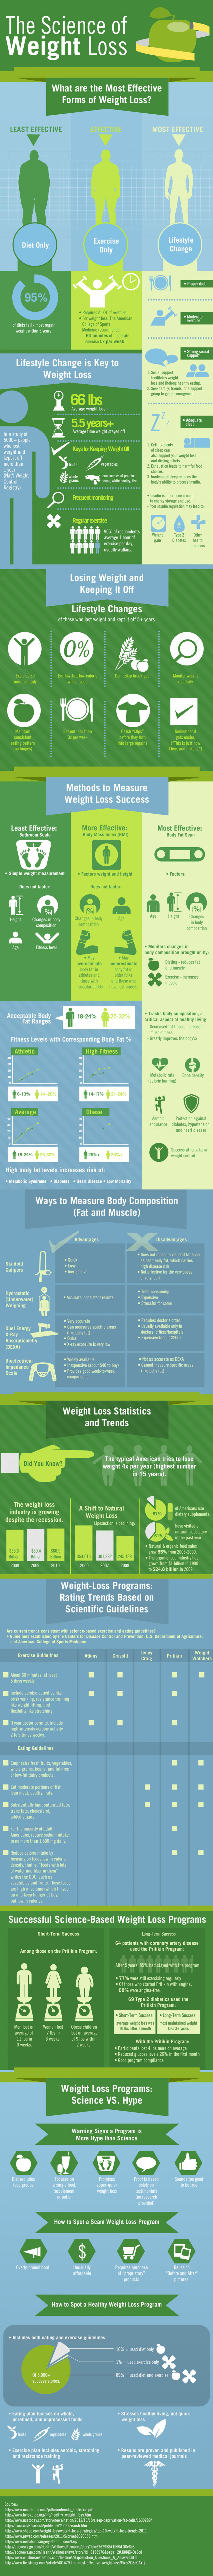 the-science-of-weight-loss_5233492167ab8_w1500